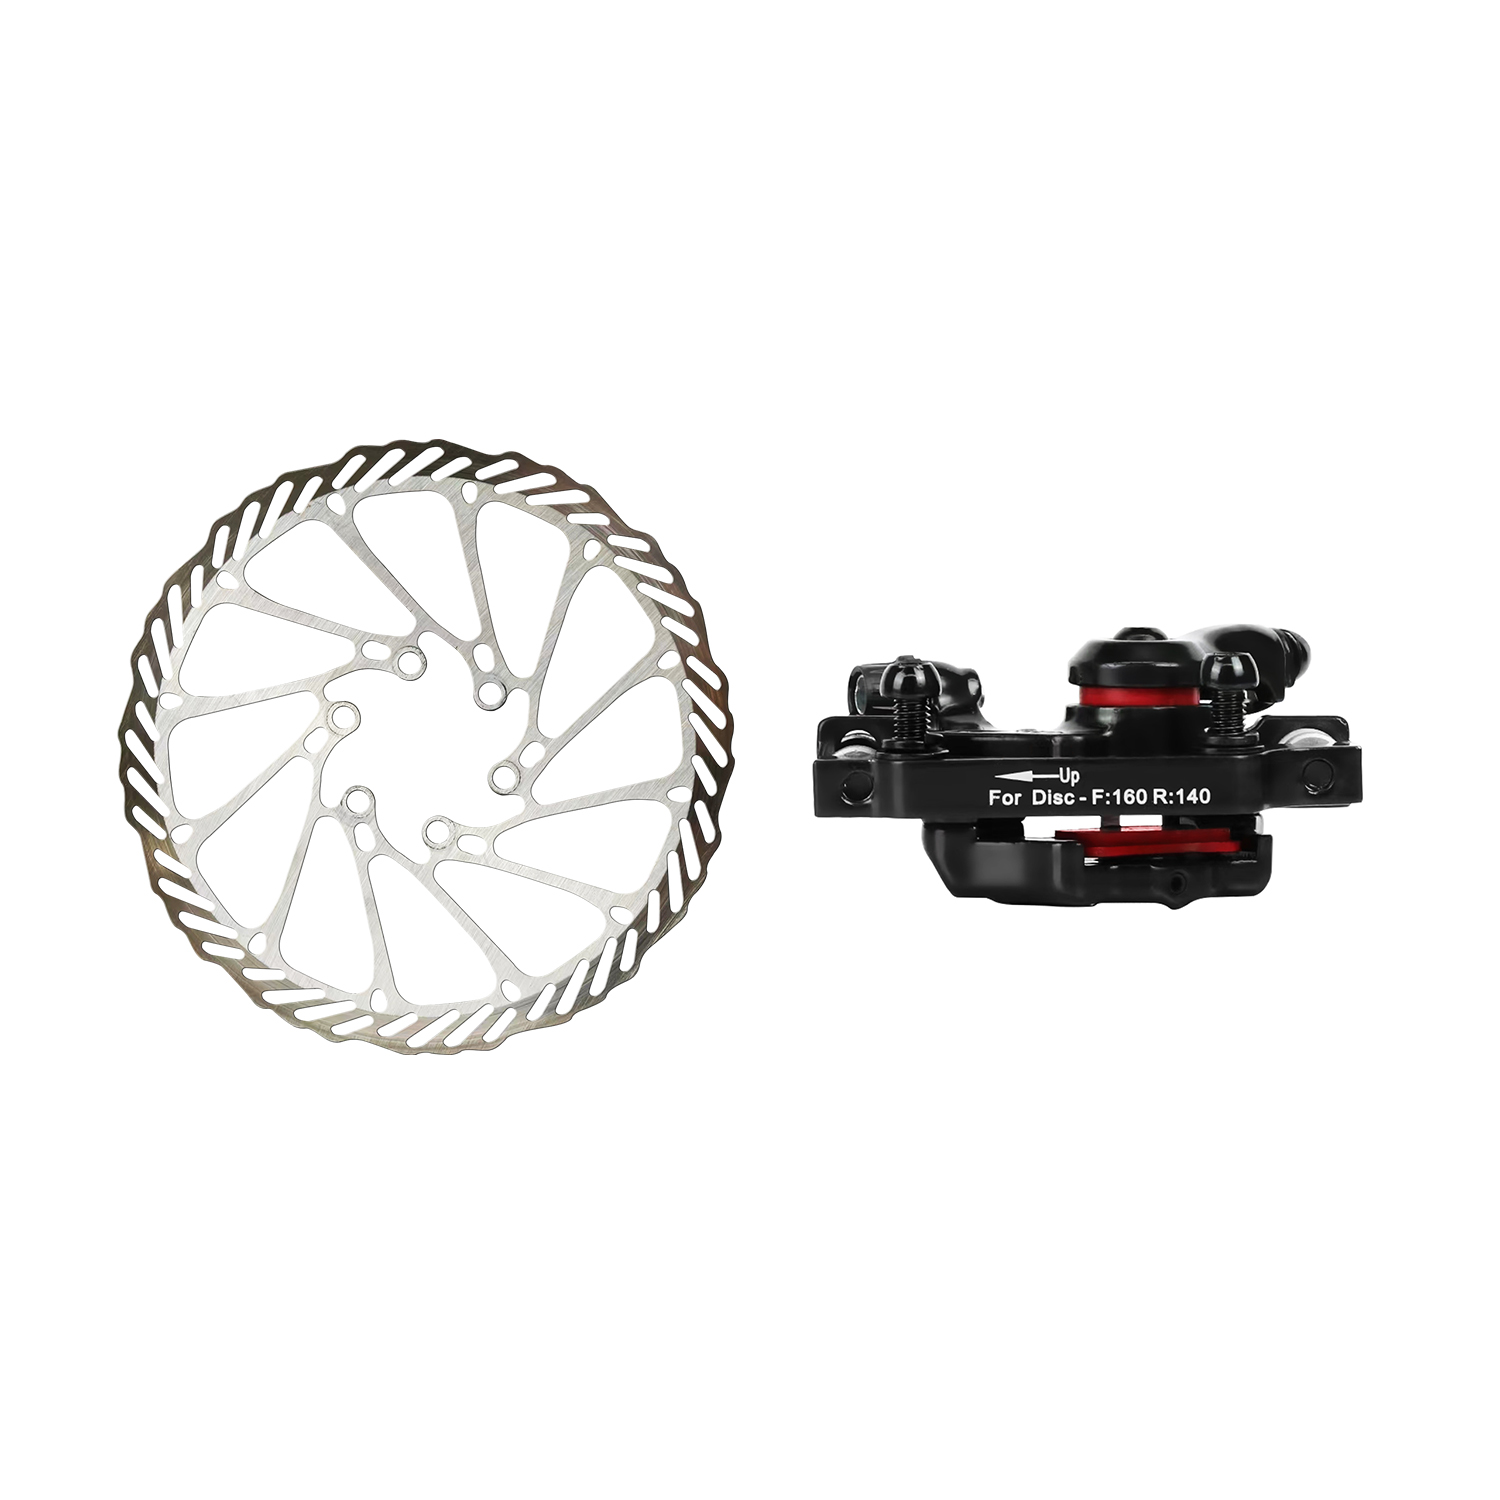 Front Brake regulator only for Sciiti 100 electric bicycle